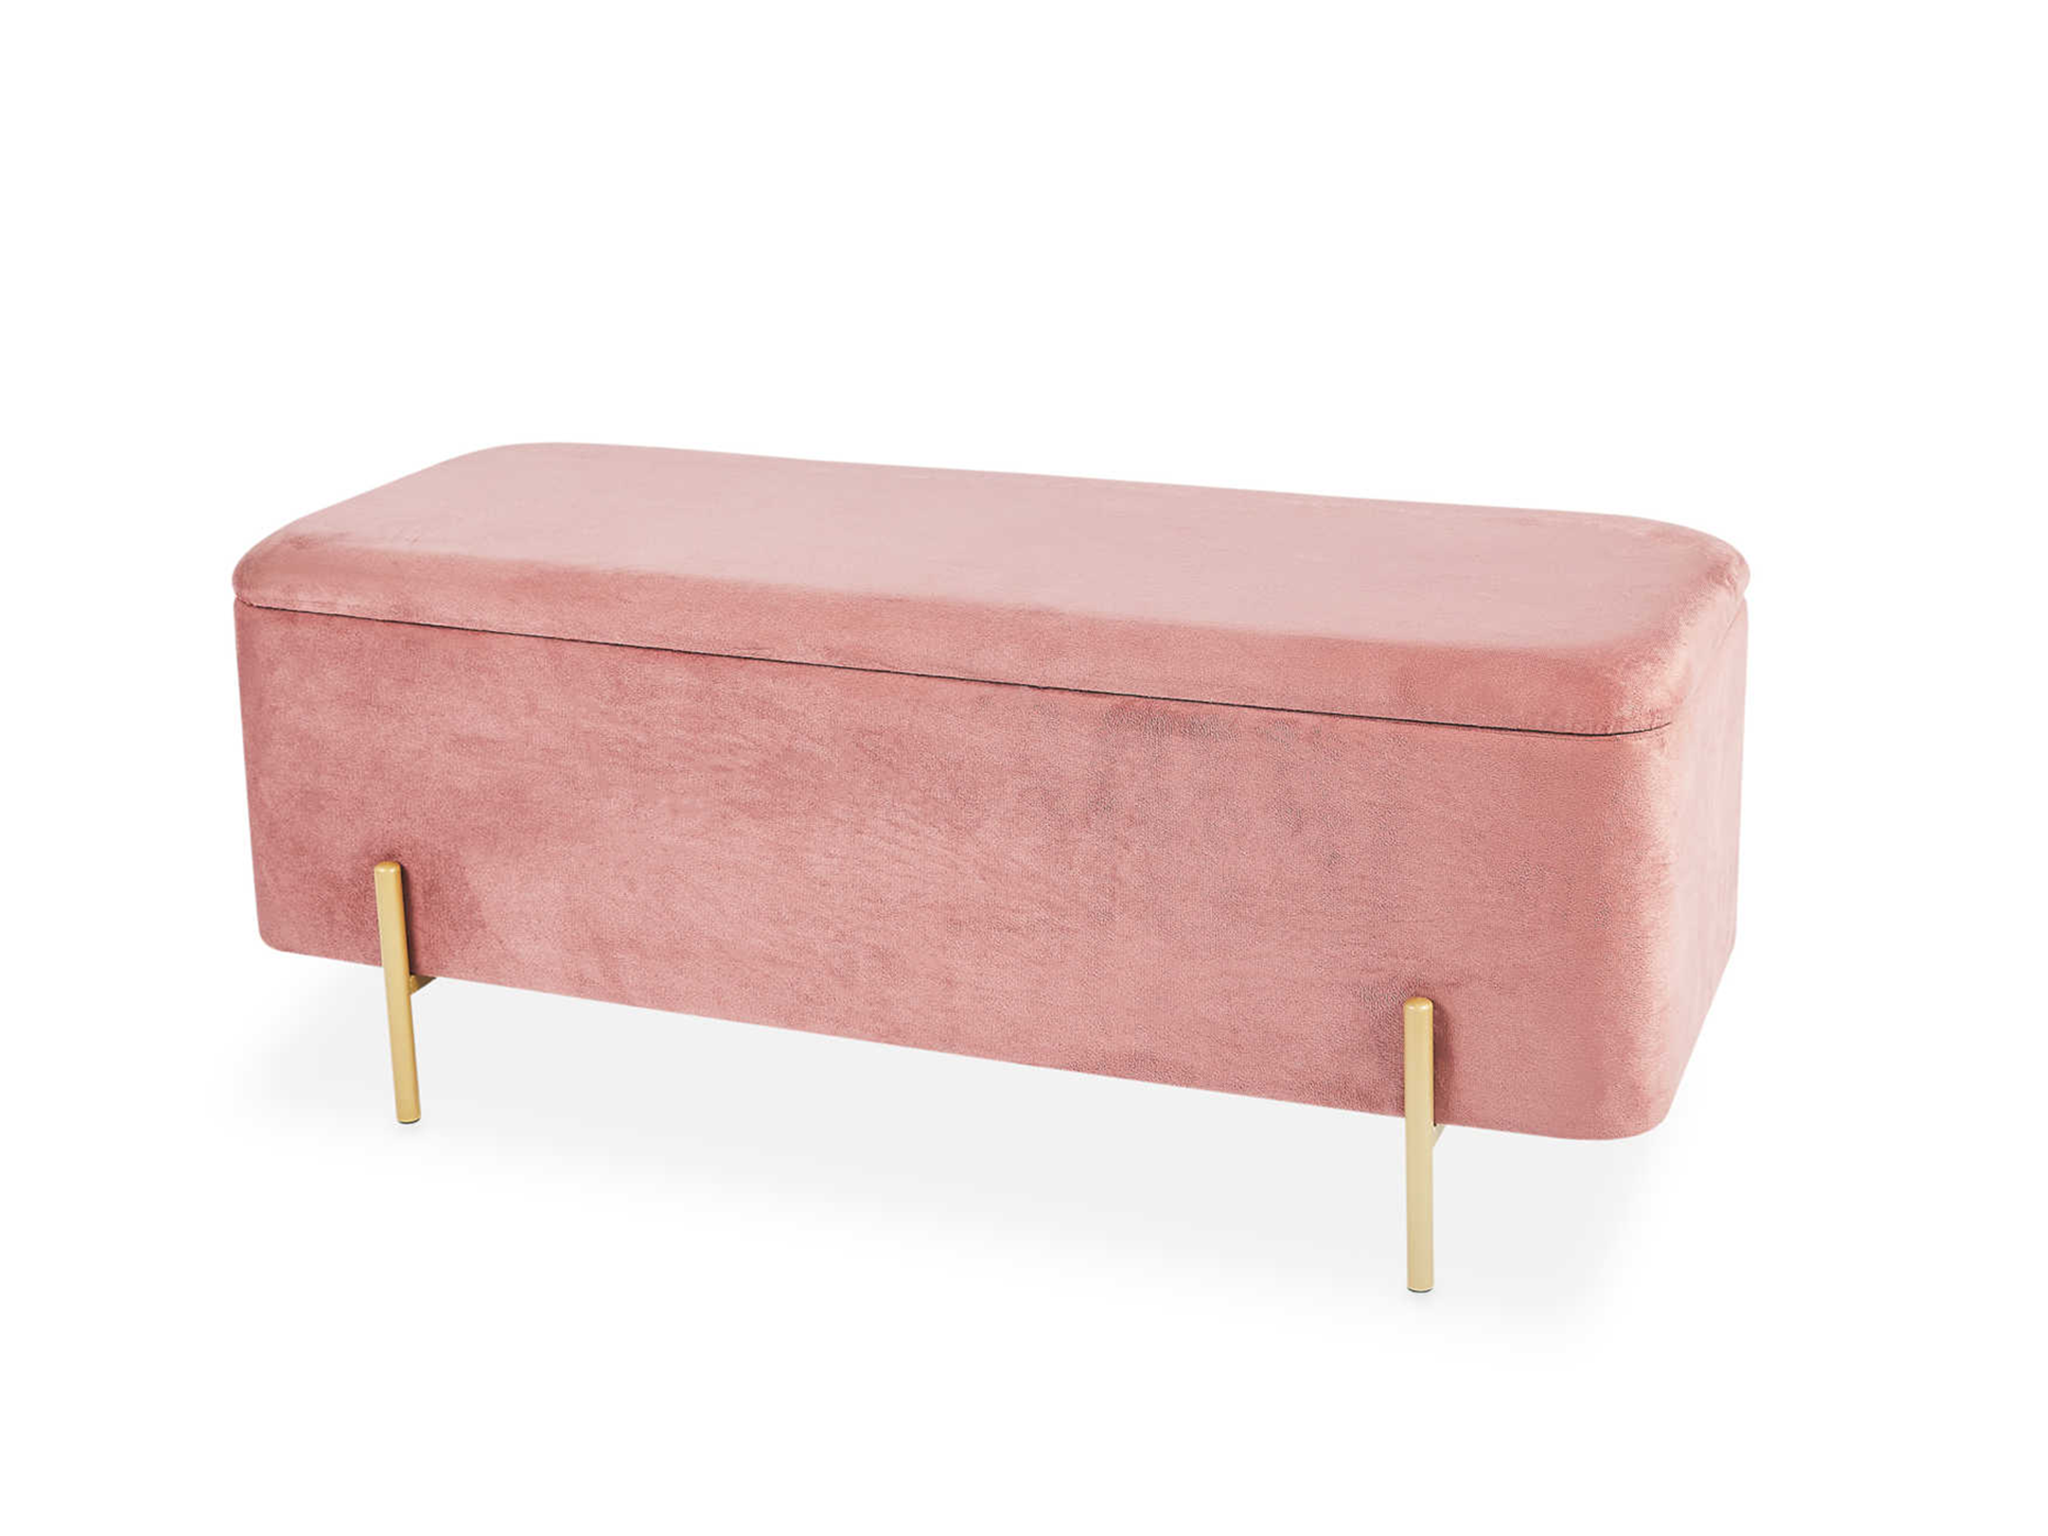 Skim ironie Stoffig Aldi storage bench: The Made look-alike piece is available for only £80 |  The Independent